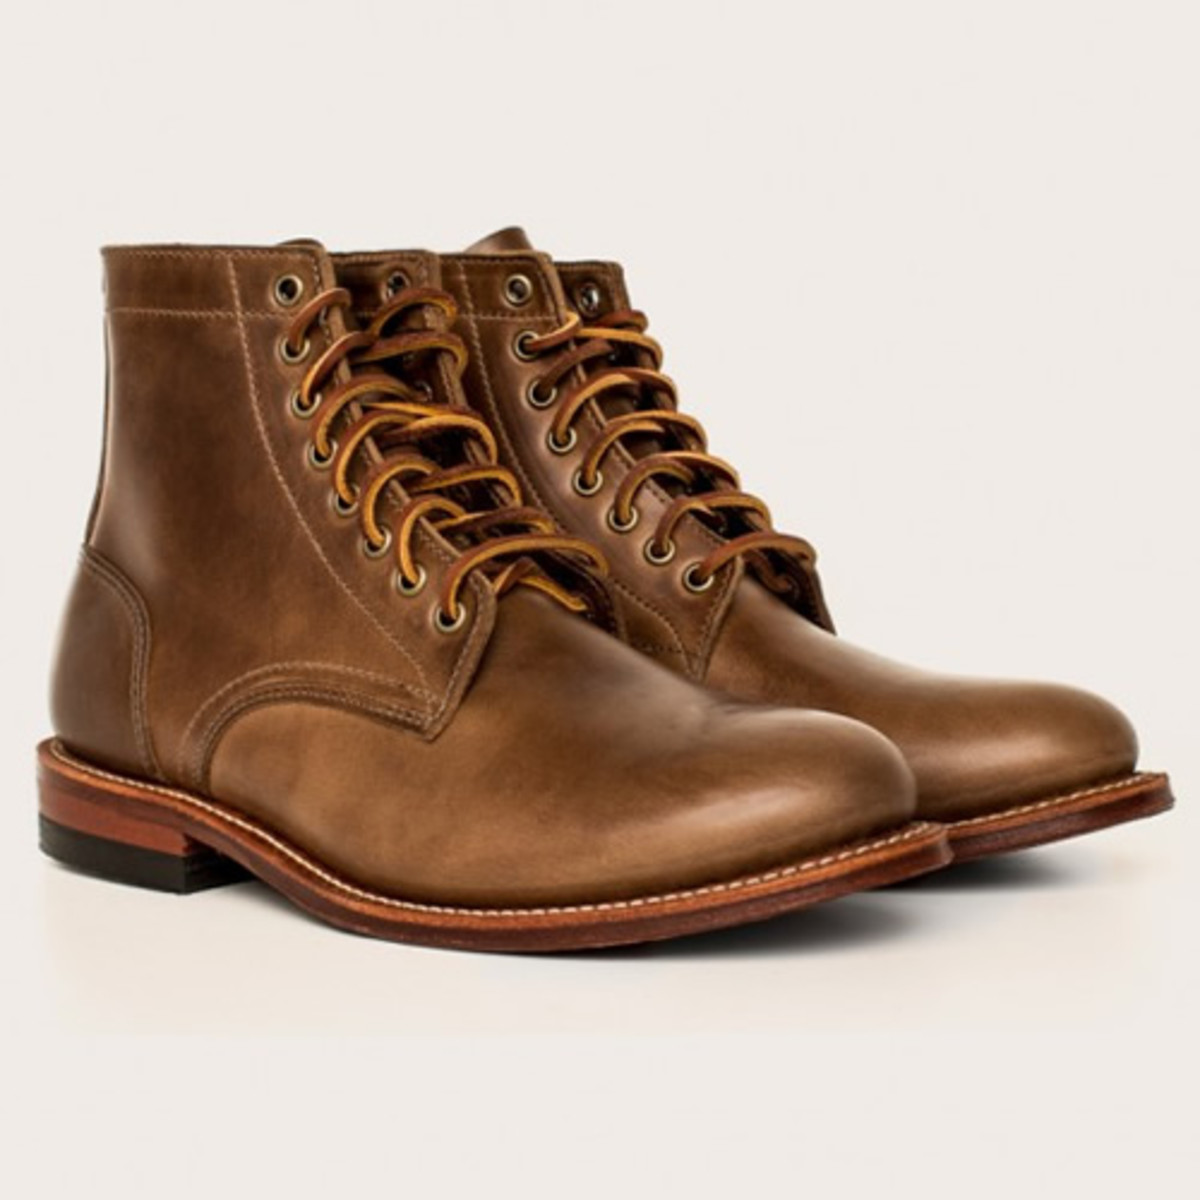 oak street bootmakers trench boot review